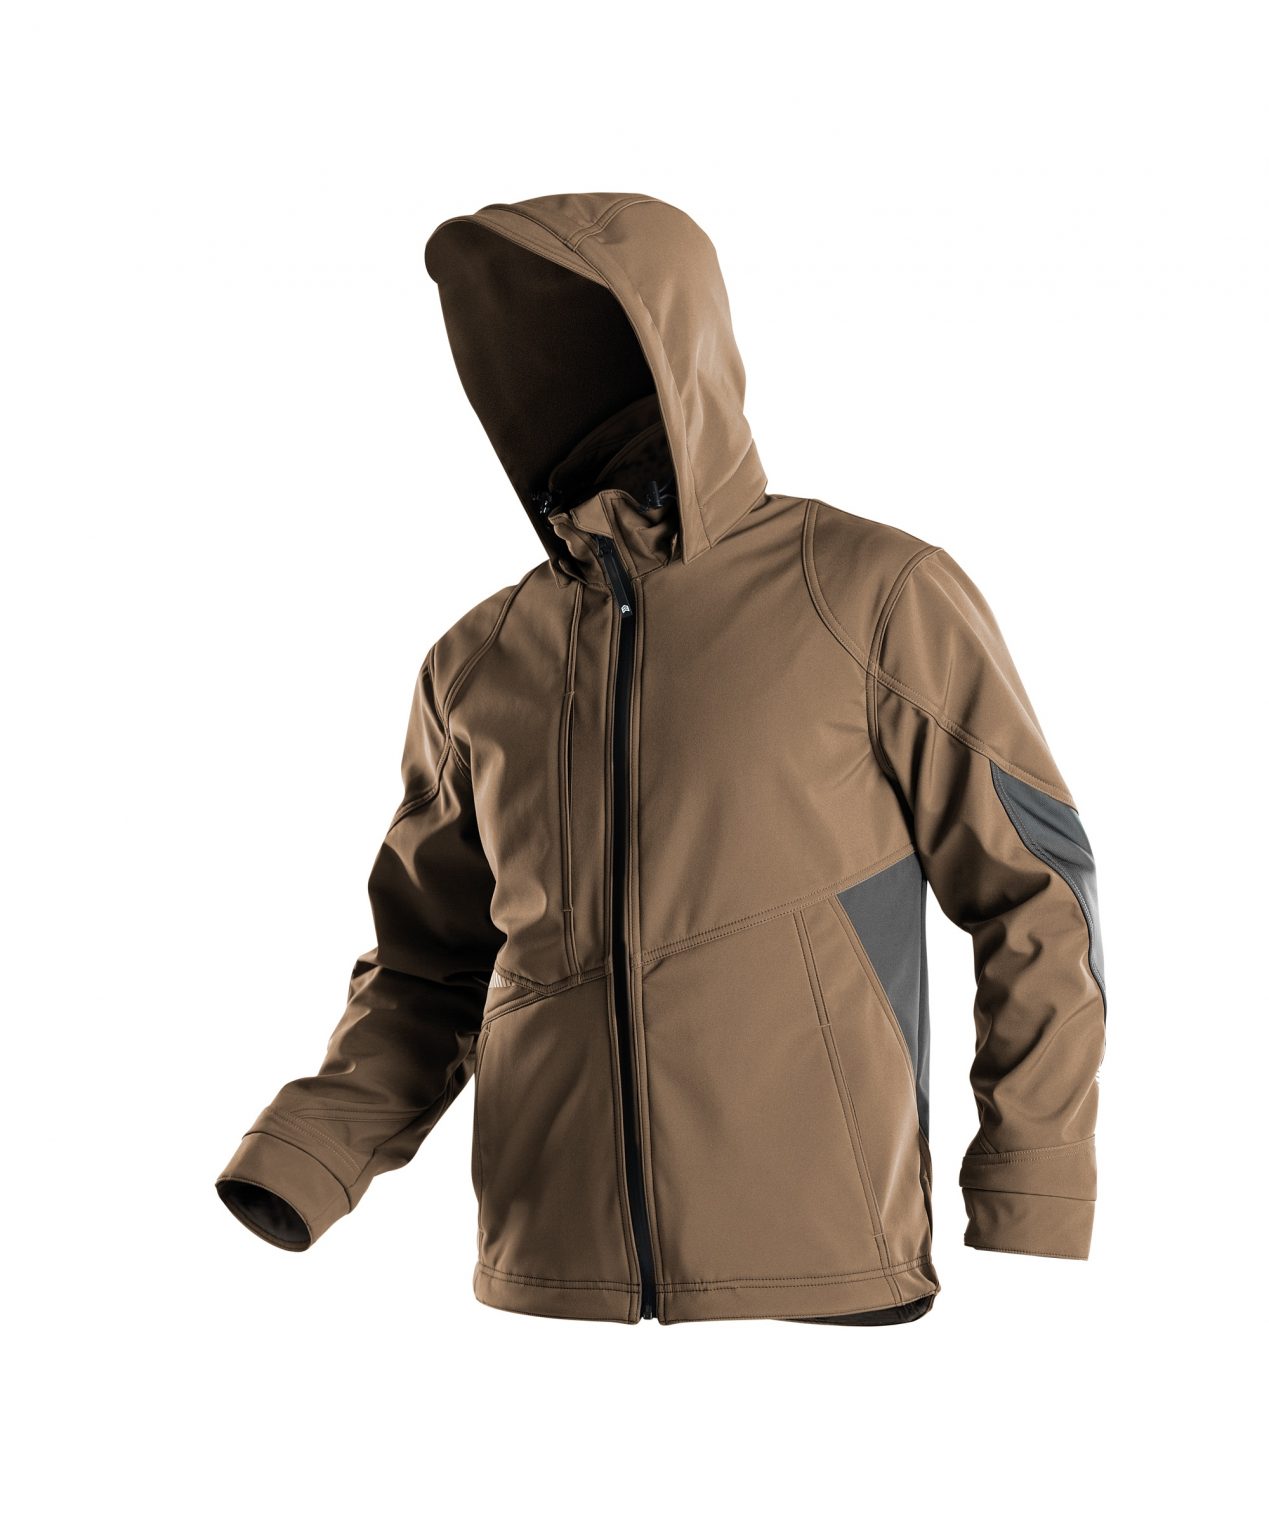 gravity softshell jacket clay brown anthracite grey detail